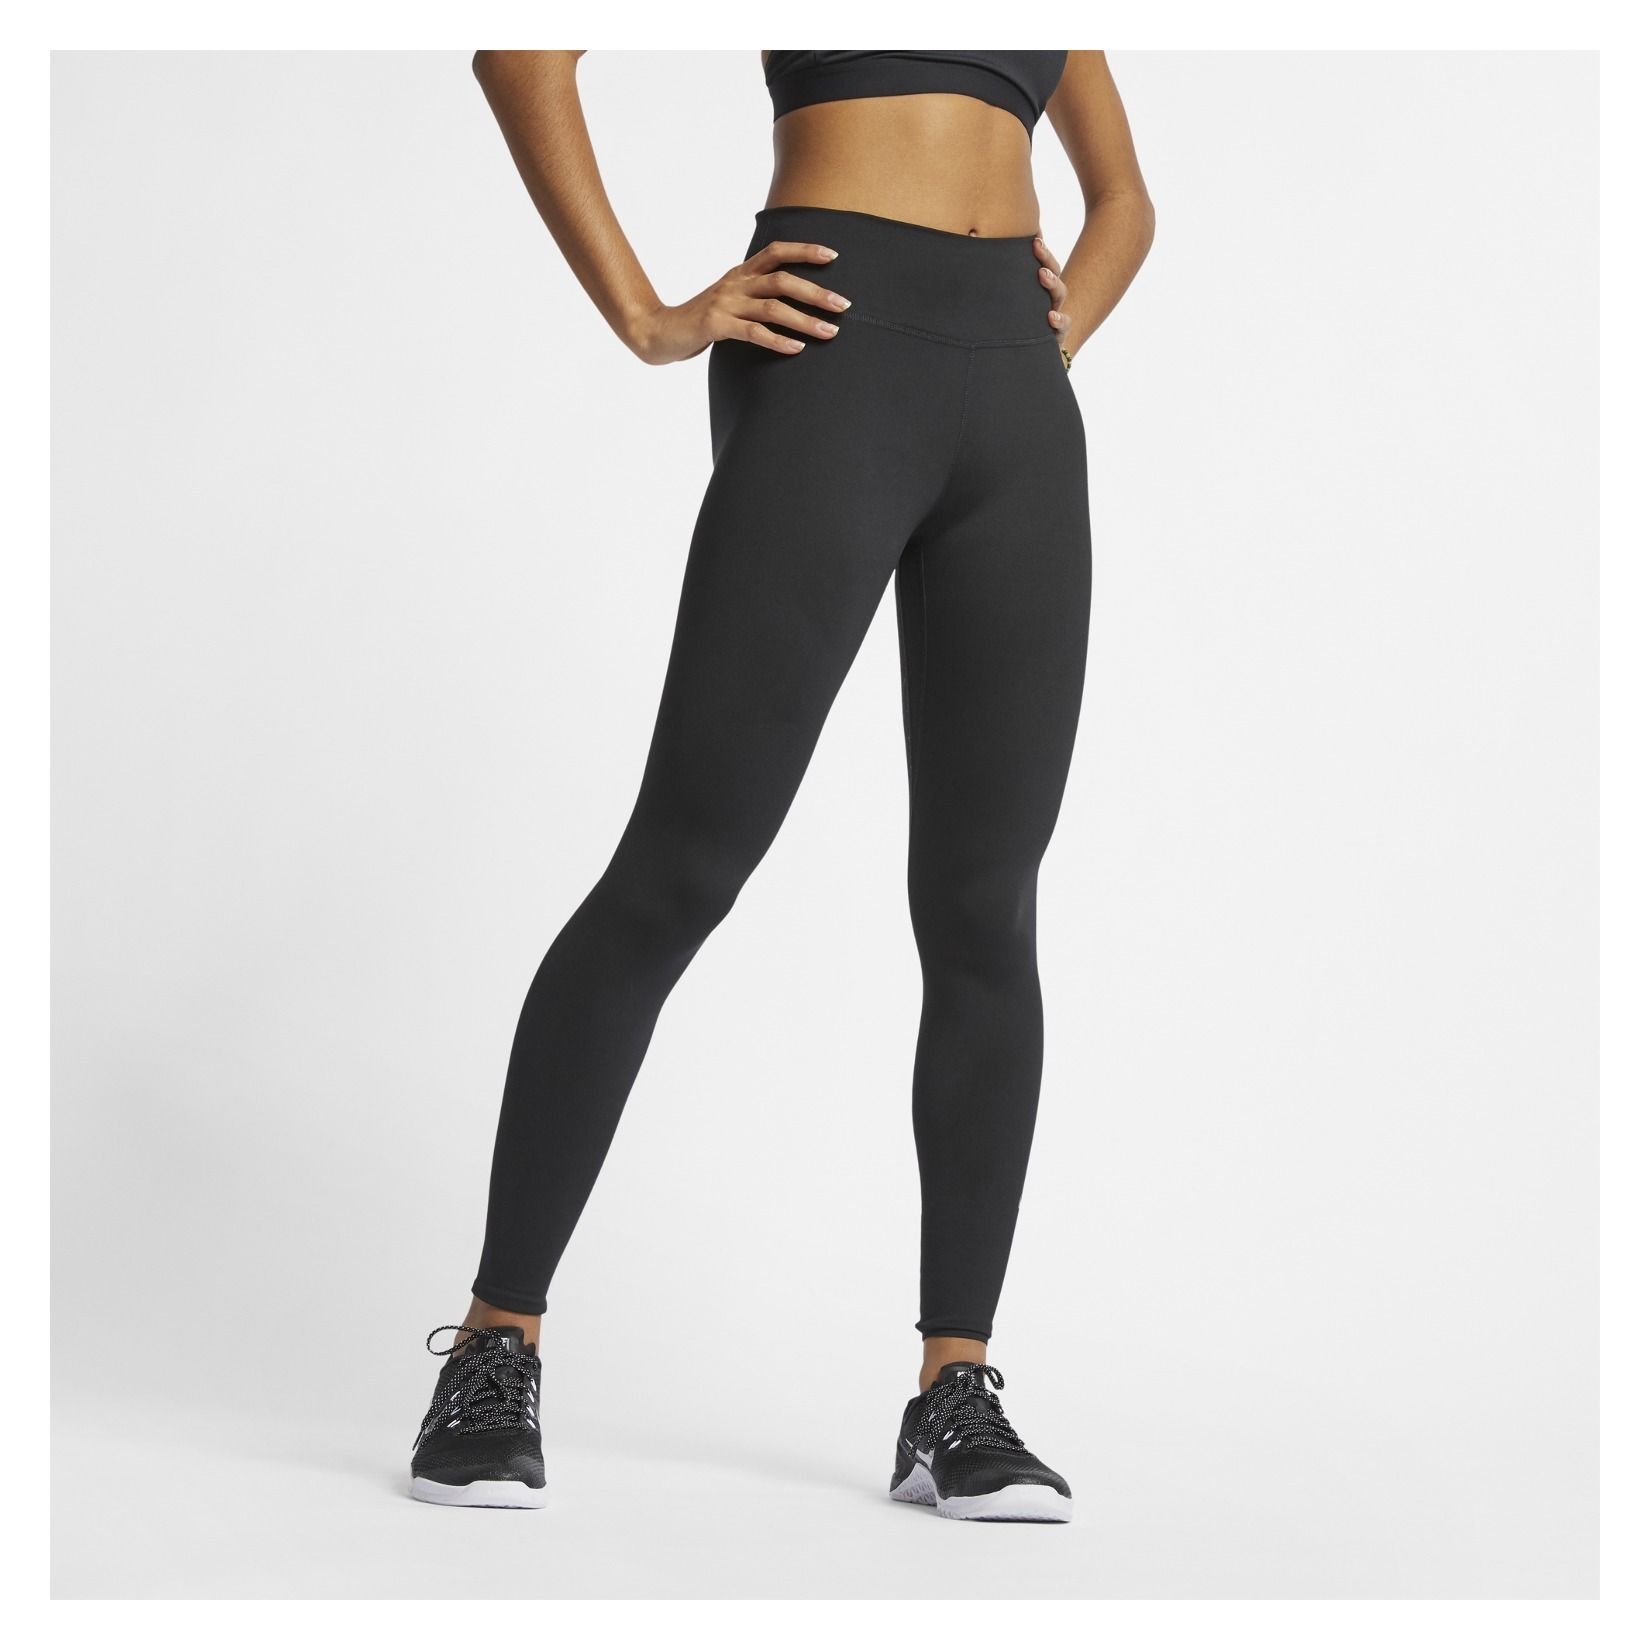 nike one women's training crop tights Promotions